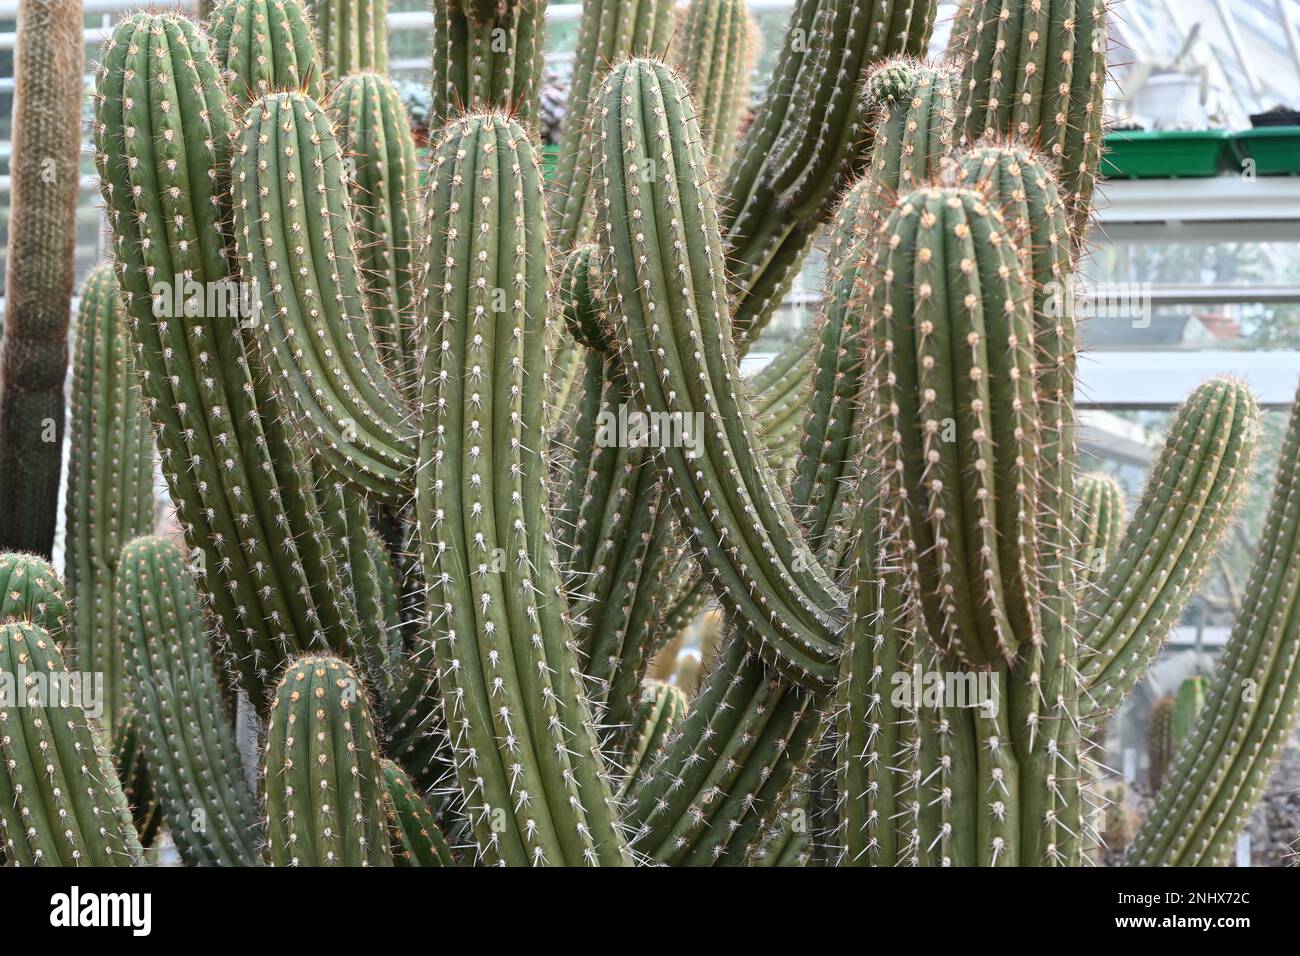 Stems of cactus in Latin called Browningia chlorocarpa growing in botanic garden. Composition cacti growing in tree shape with focus on the foreground Stock Photo